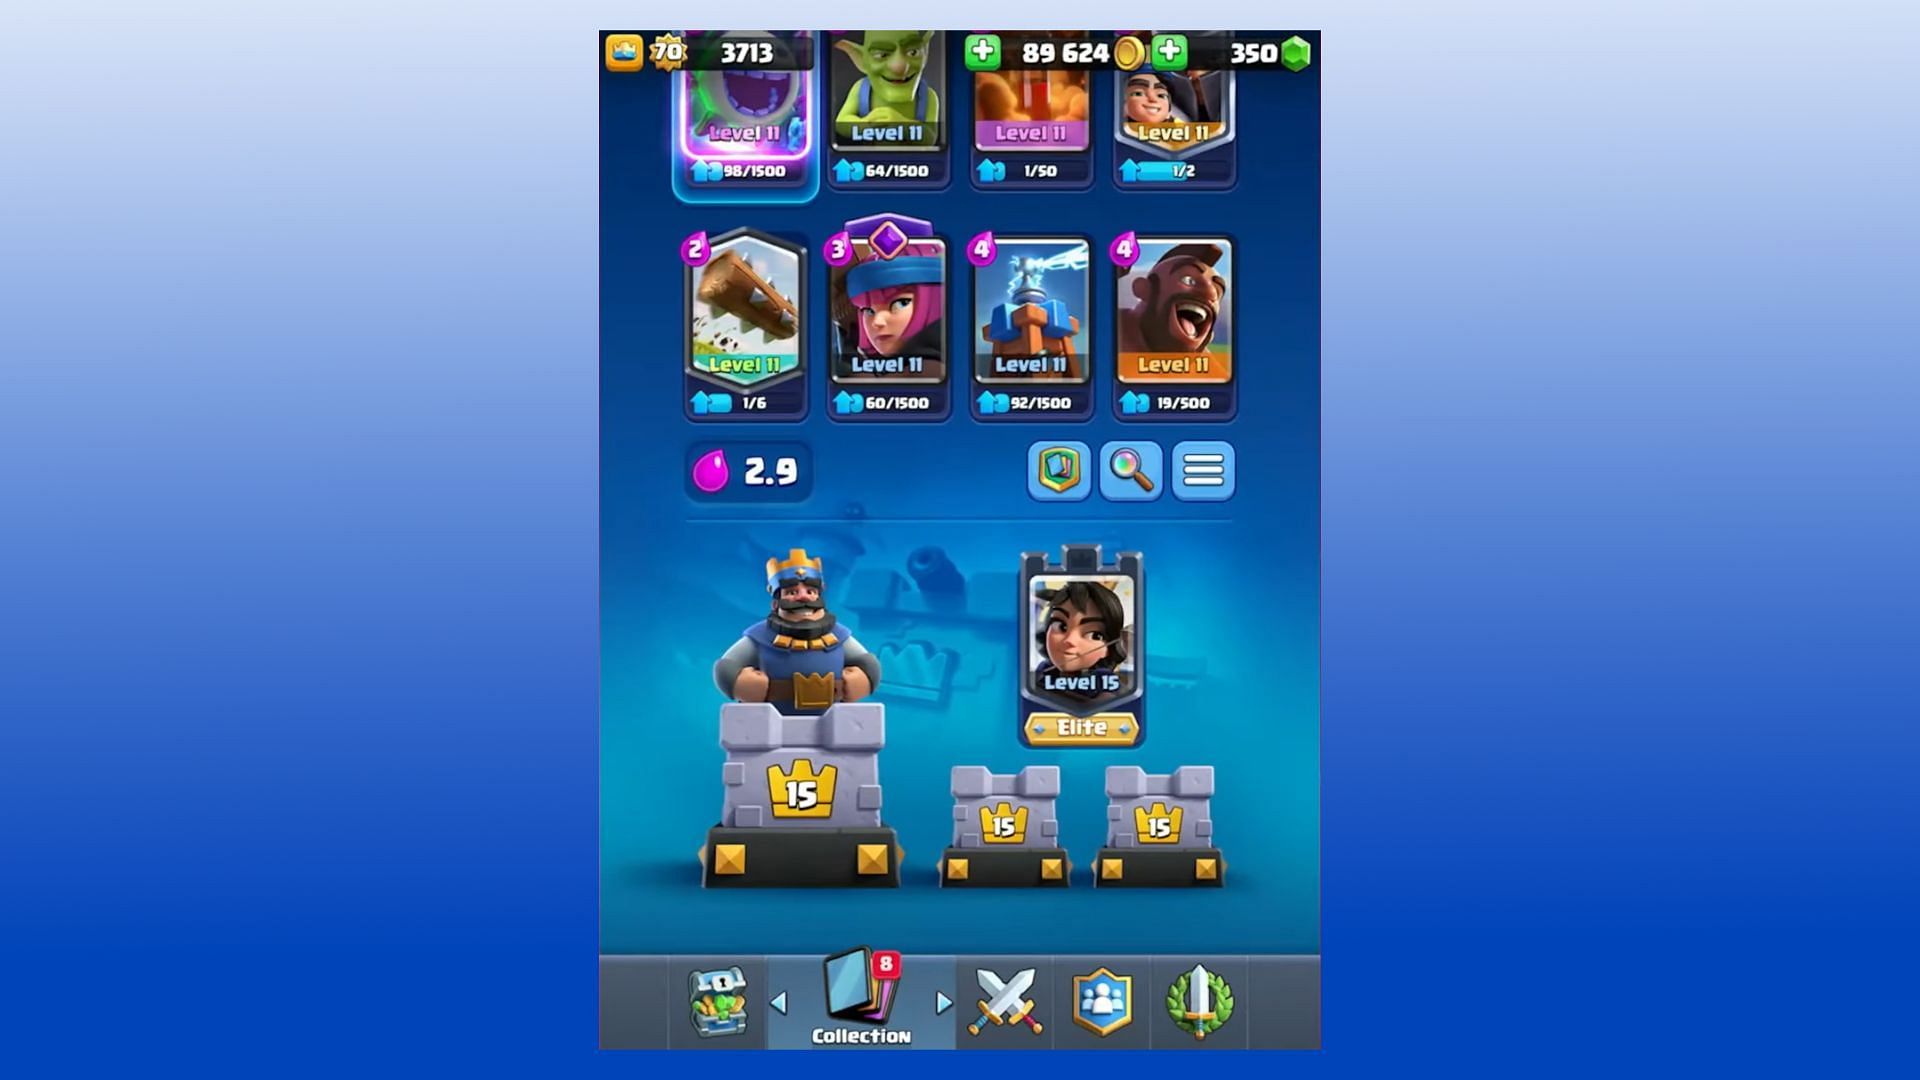 Maximum level of troops (Image via Supercell)